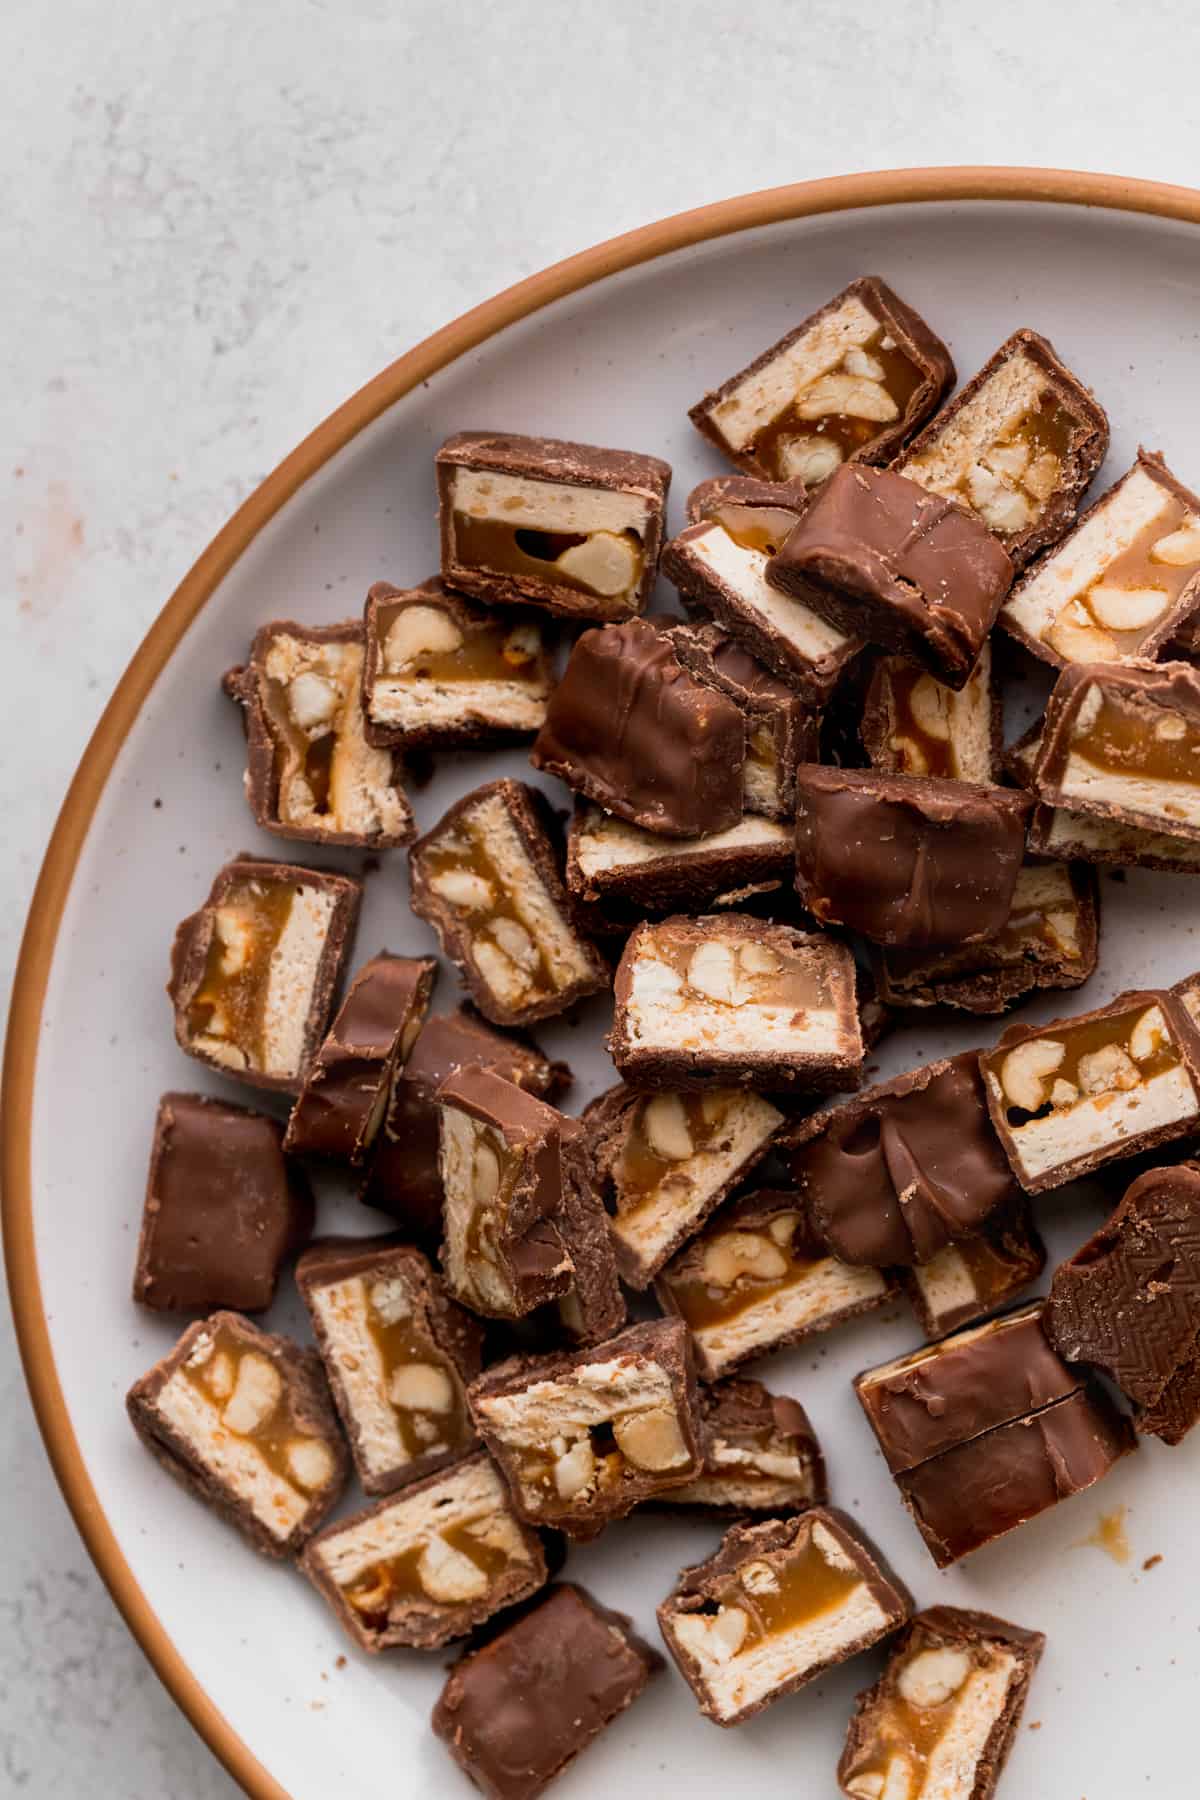 Chopped Snickers on a plate.